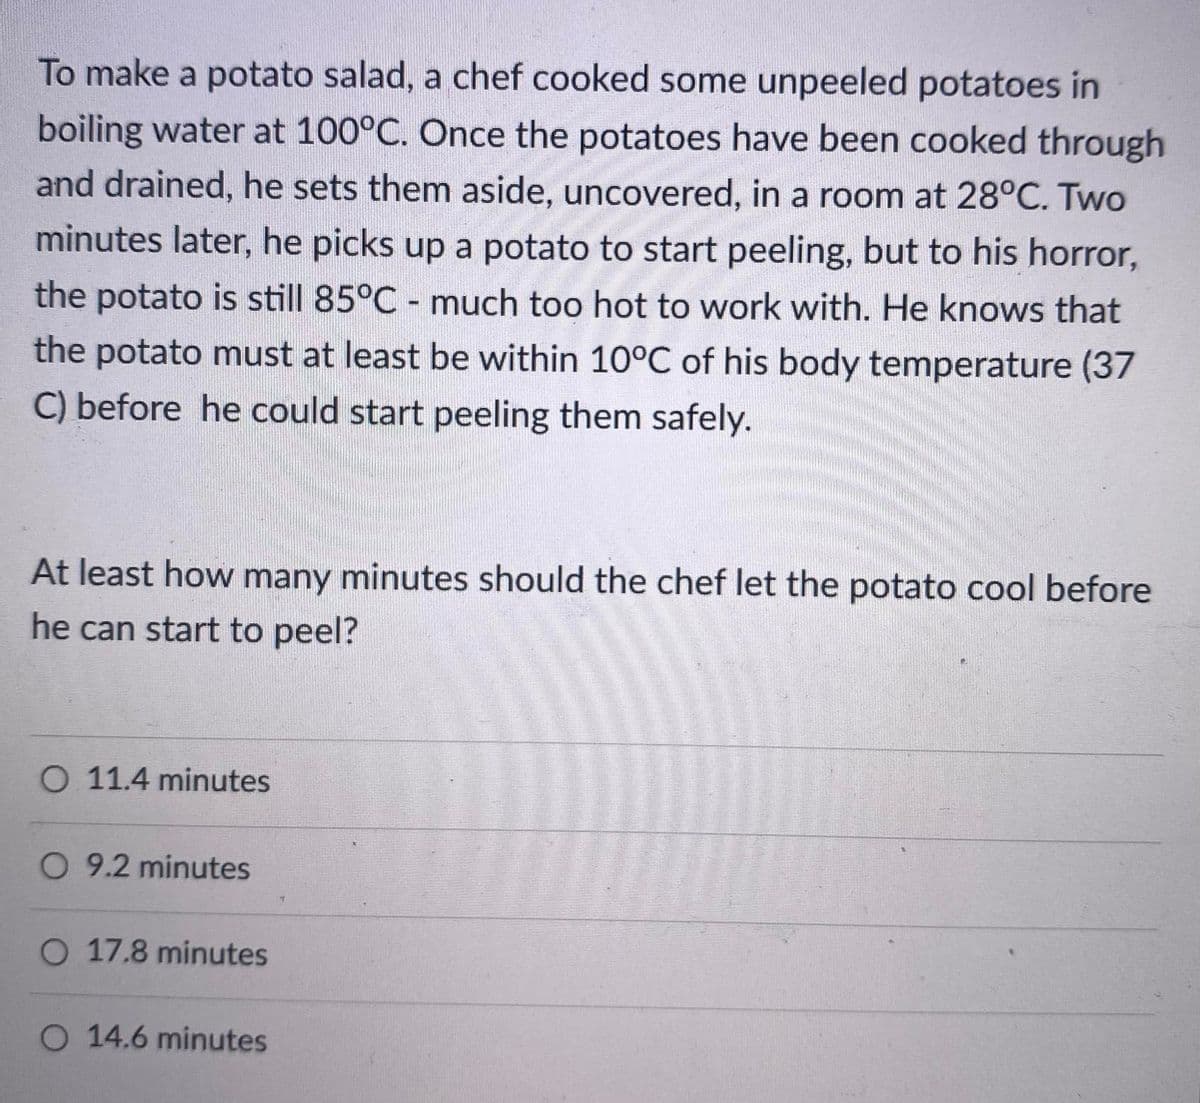 To make a potato salad, a chef cooked some unpeeled potatoes in
boiling water at 100°C. Once the potatoes have been cooked through
and drained, he sets them aside, uncovered, in a room at 28°C. Two
minutes later, he picks up a potato to start peeling, but to his horror,
the potato is still 85°C - much too hot to work with. He knows that
the potato must at least be within 10°C of his body temperature (37
C) before he could start peeling them safely.
At least how many minutes should the chef let the potato cool before
he can start to peel?
O 11.4 minutes
O 9.2 minutes
O 17.8 minutes
O 14.6 minutes
